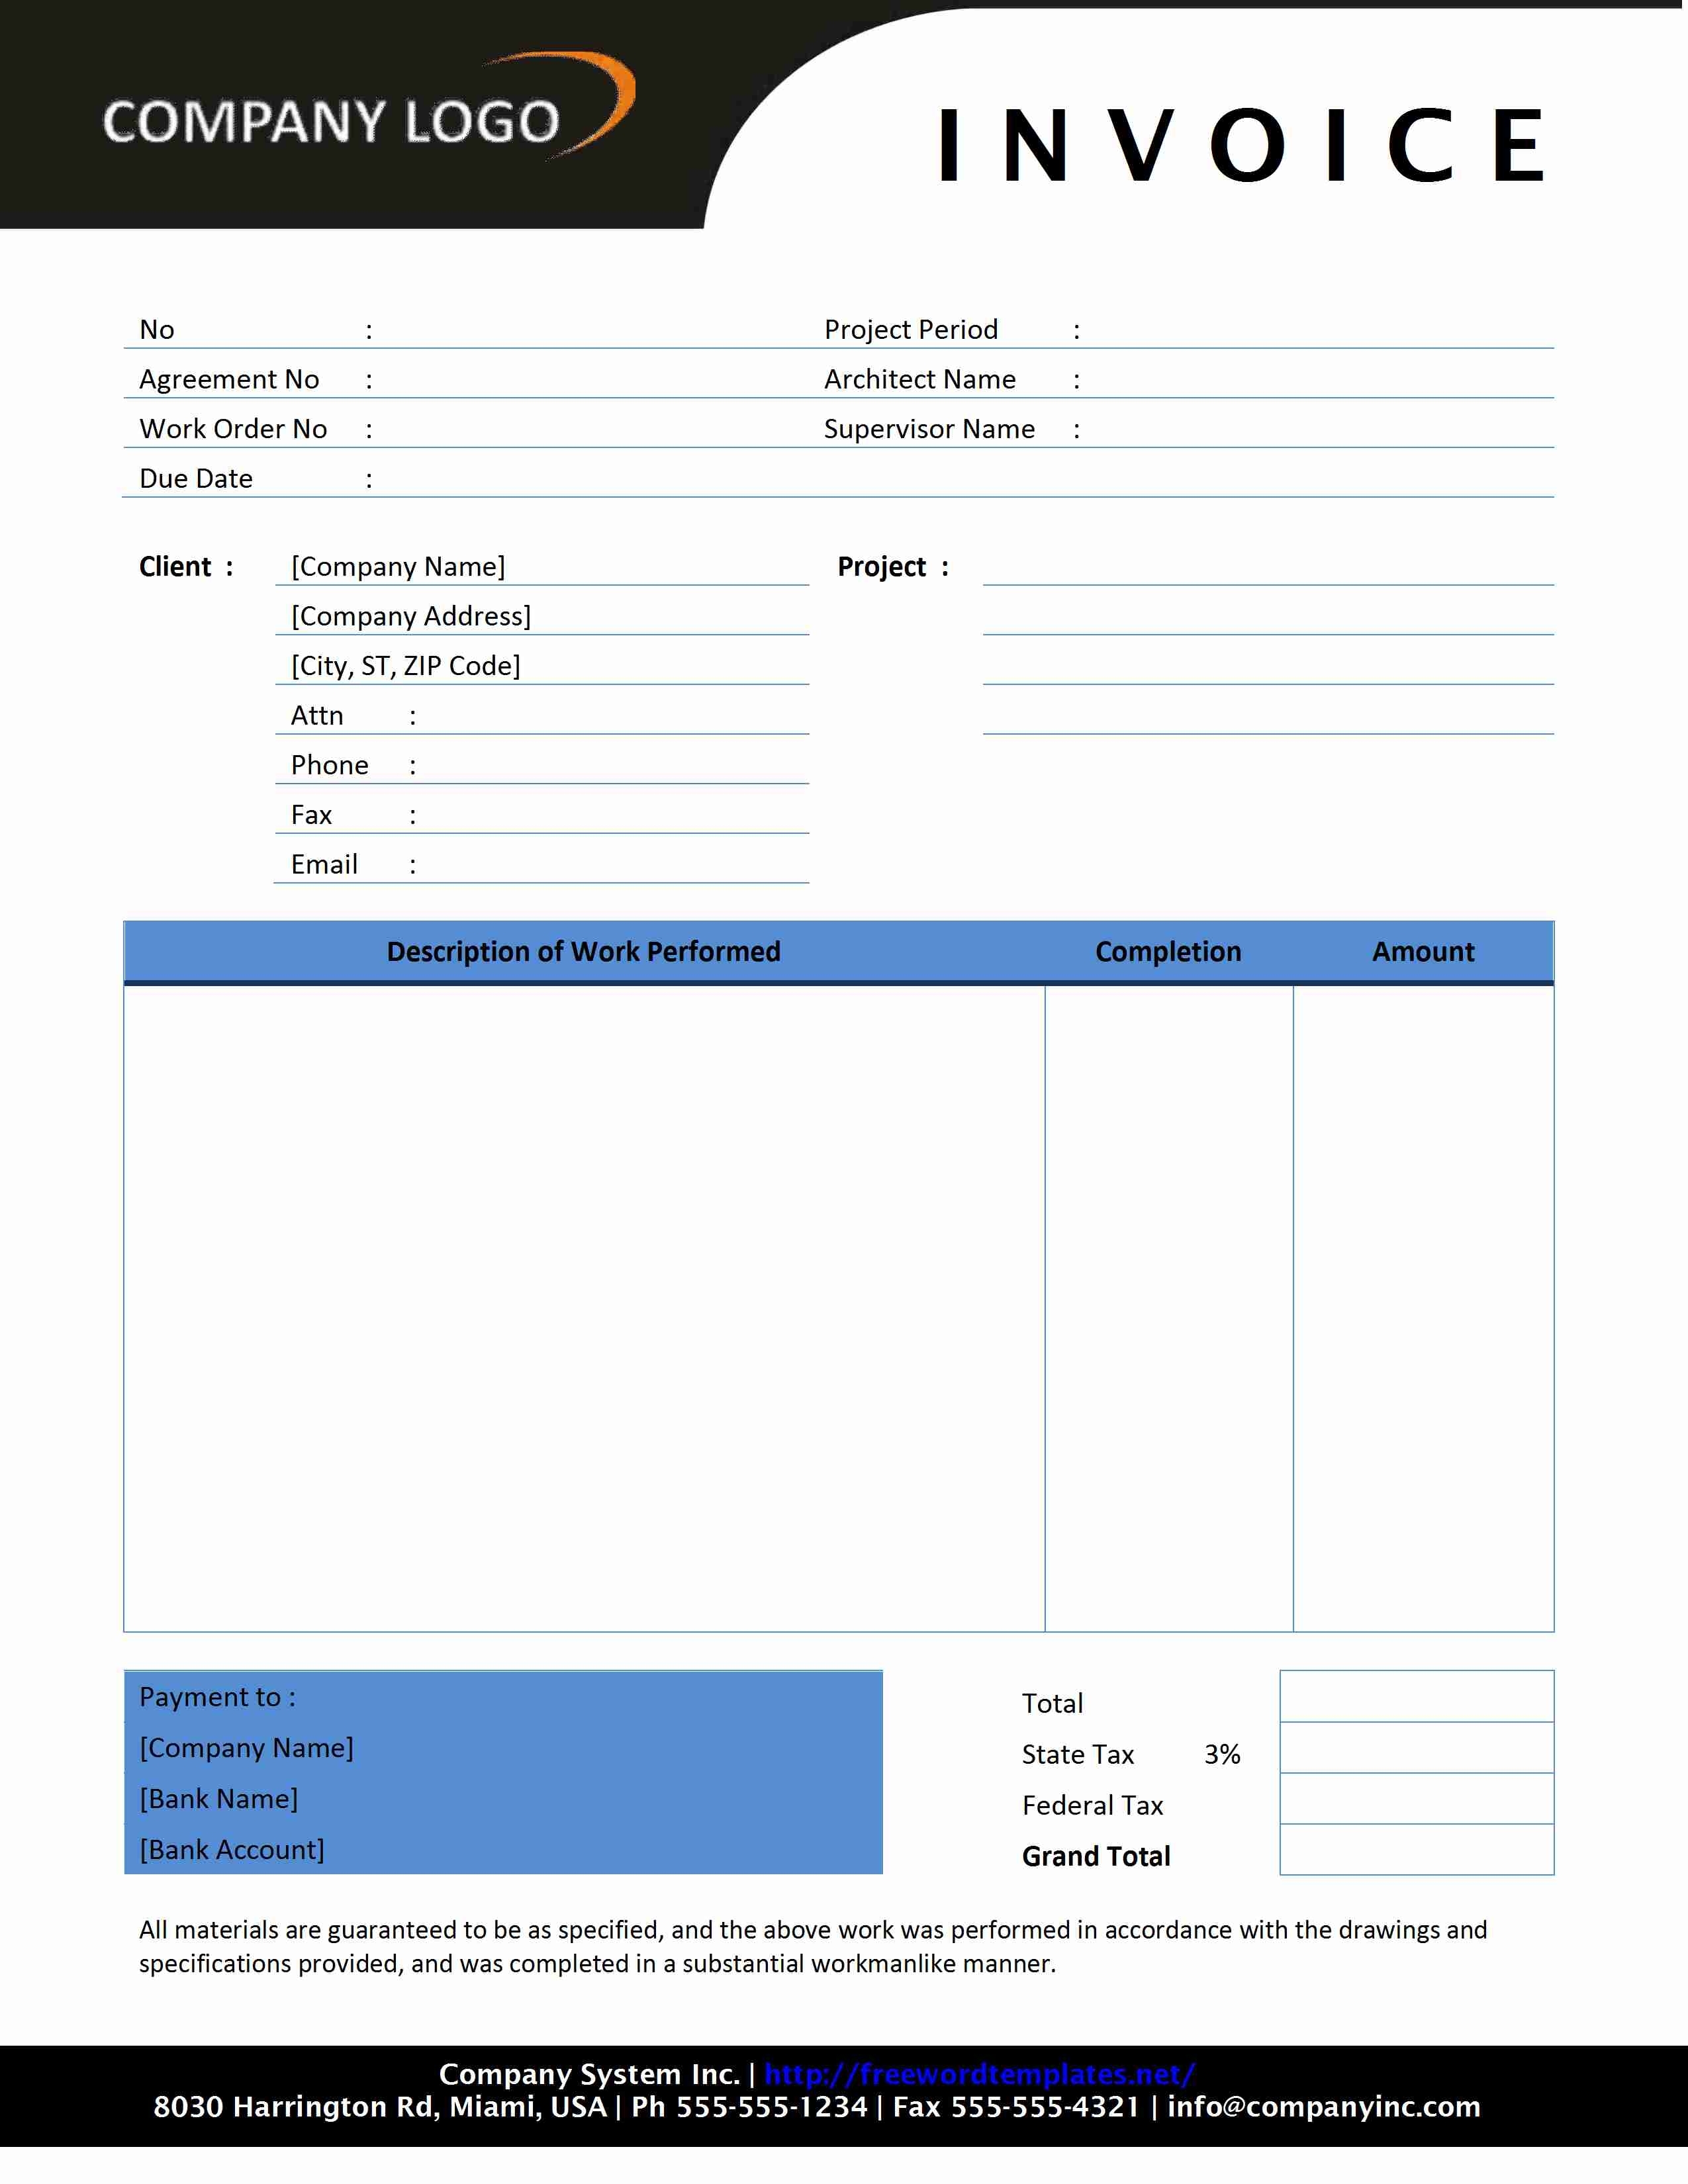 proforma invoice meaning pro forma invoice meaning invoice template free 2016 2550 X 3300